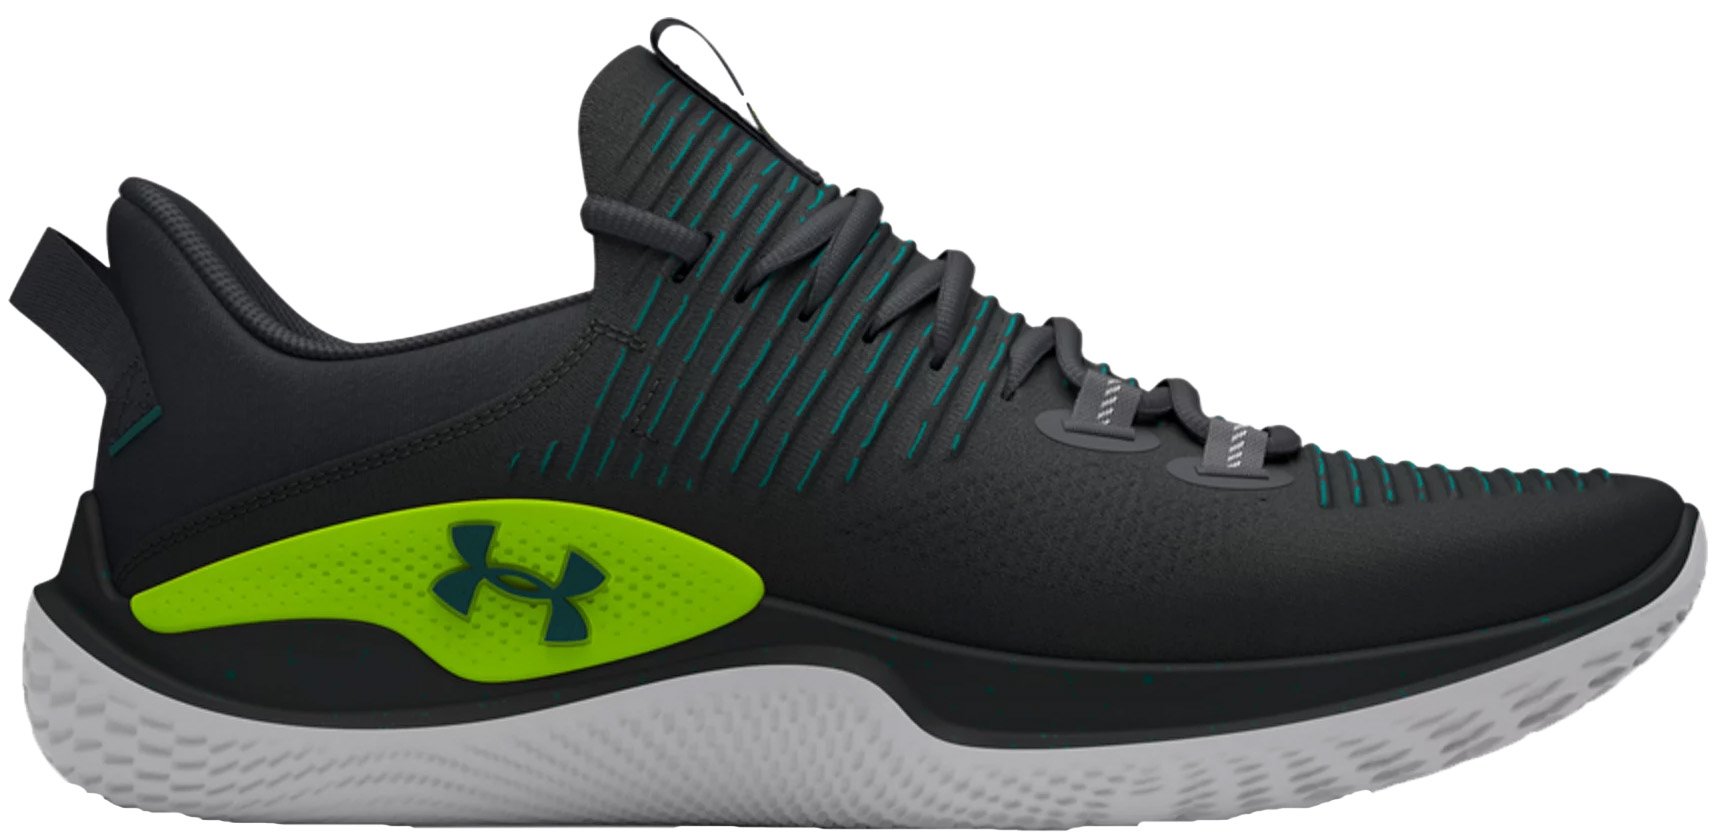 Fitness topánky Under Armour UA Flow Dynamic INTLKNT-BLK